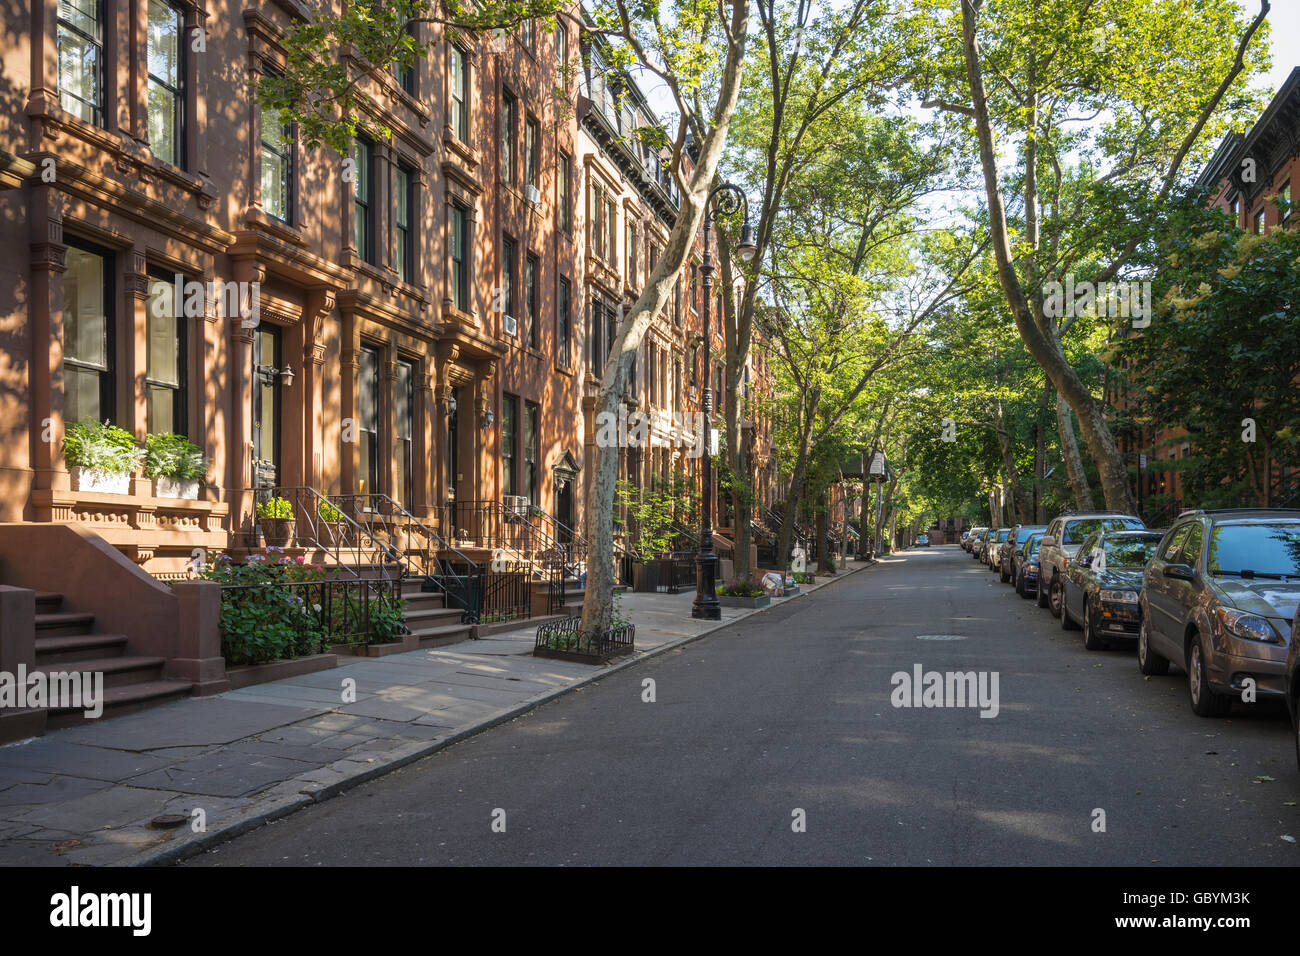 Tree-lined street with attractive brownstone buildings in affluent residential neighborhood in Brooklyn Heights, New York Stock Photo